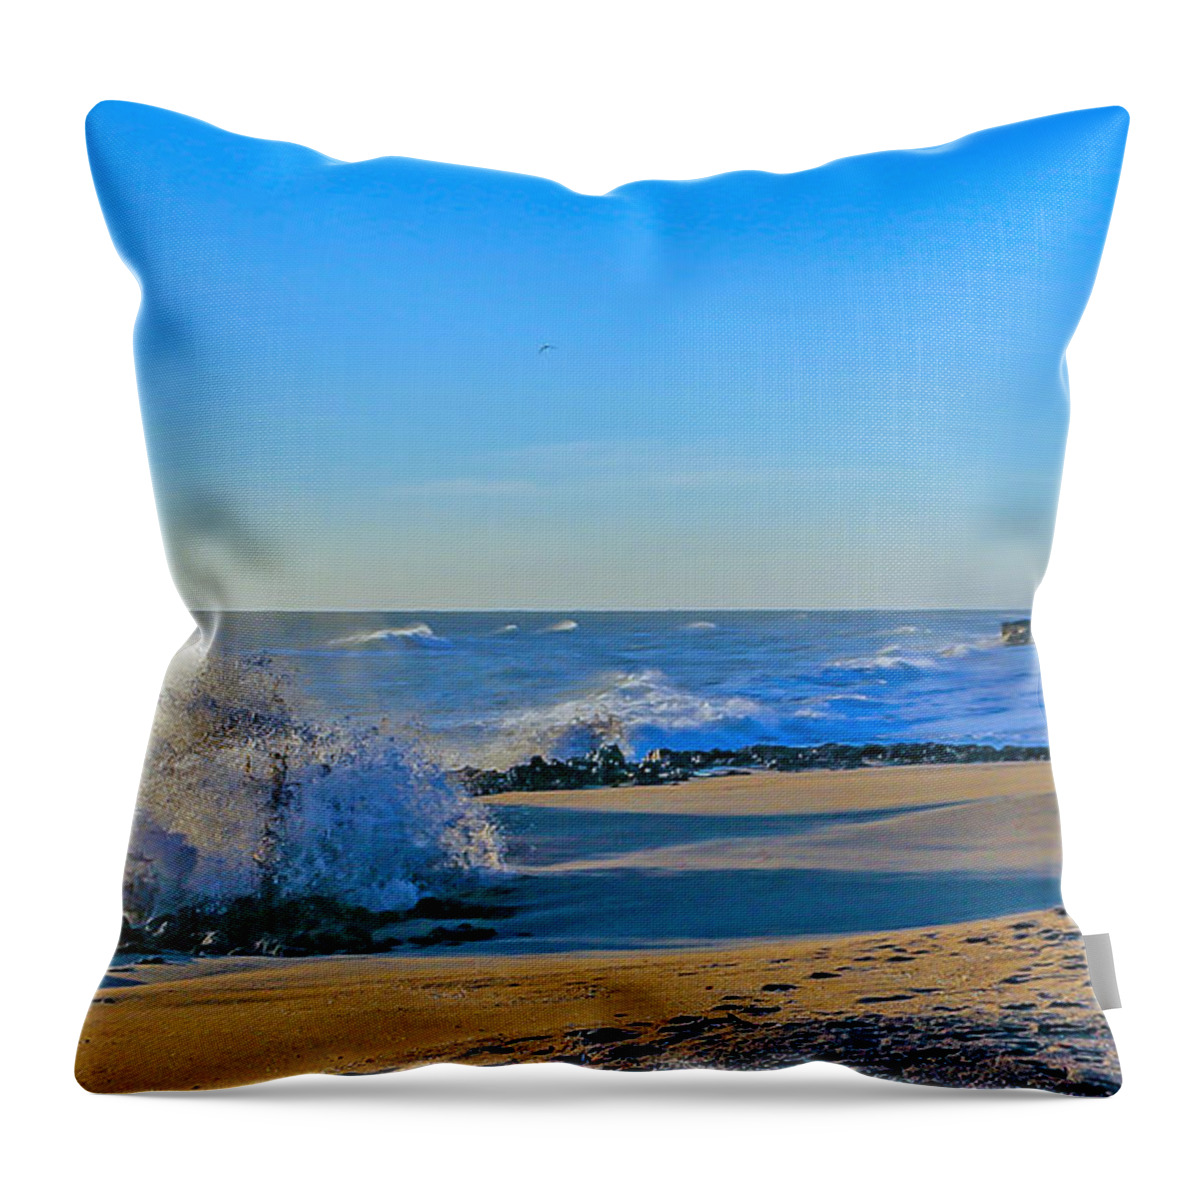 Waves Throw Pillow featuring the photograph Waves, Rocks, Beach Houses by Tom Claud